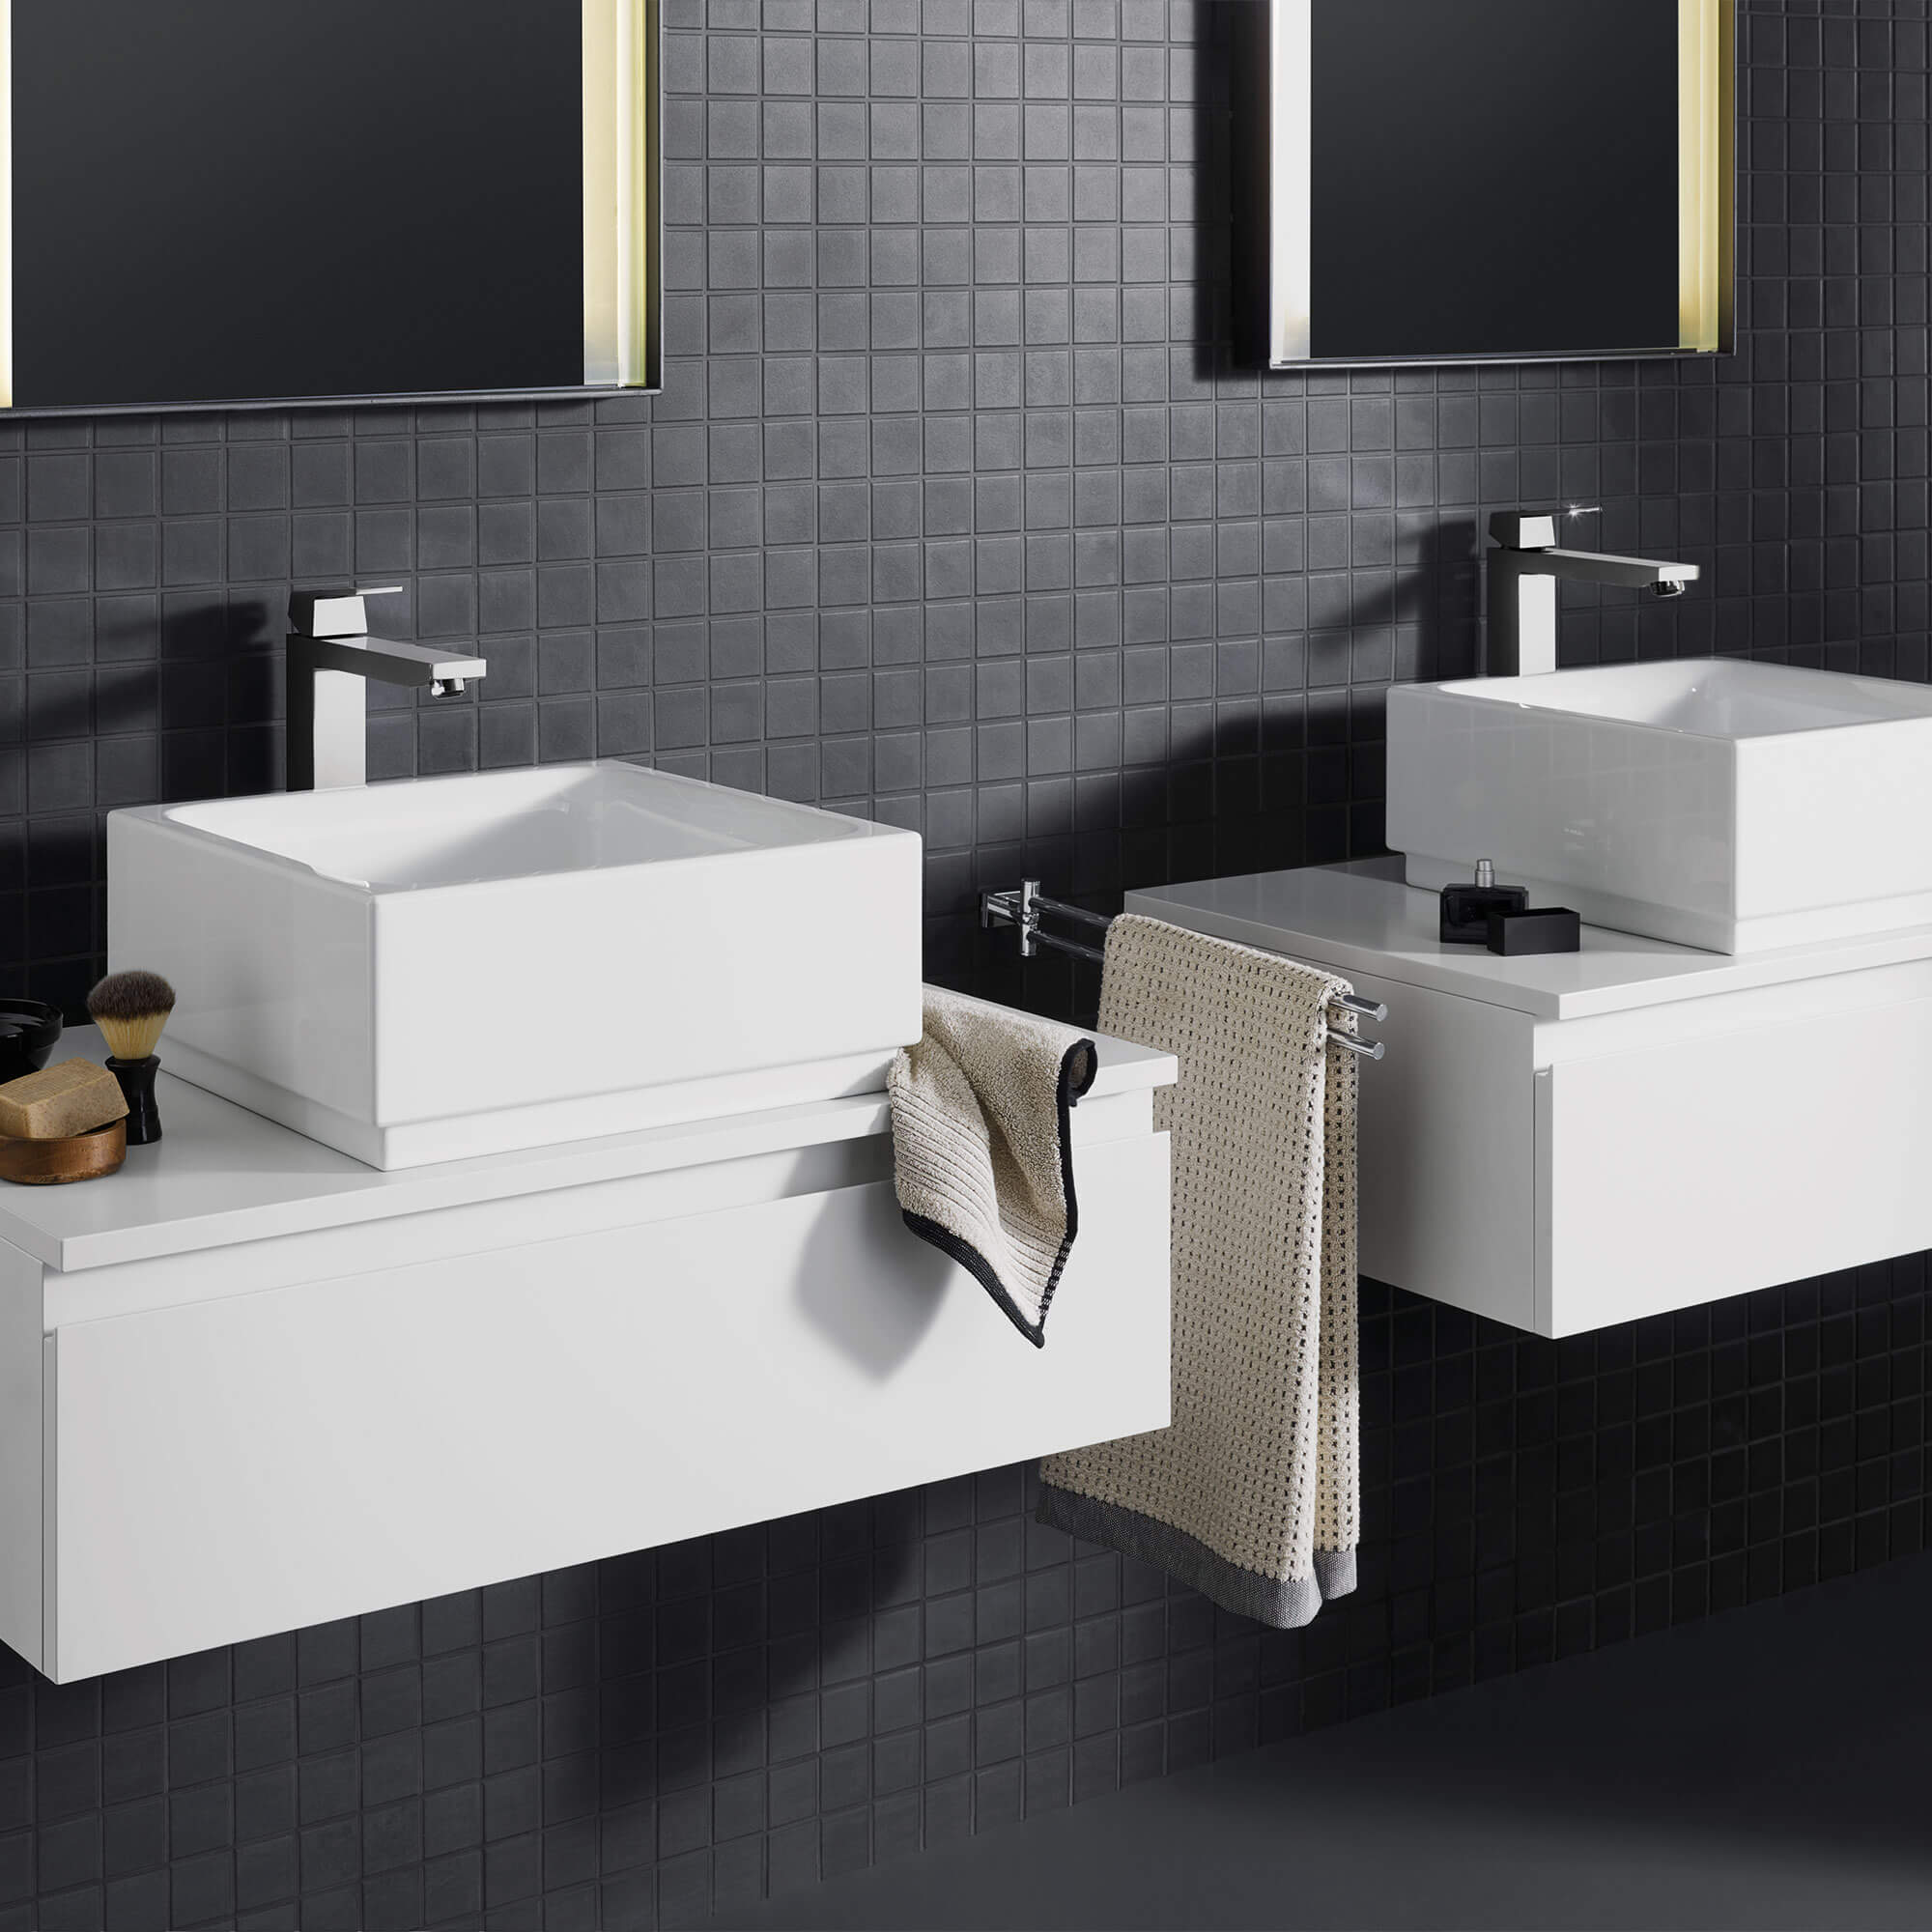 Eurocube faucet in a bathroom with black tiled walls.